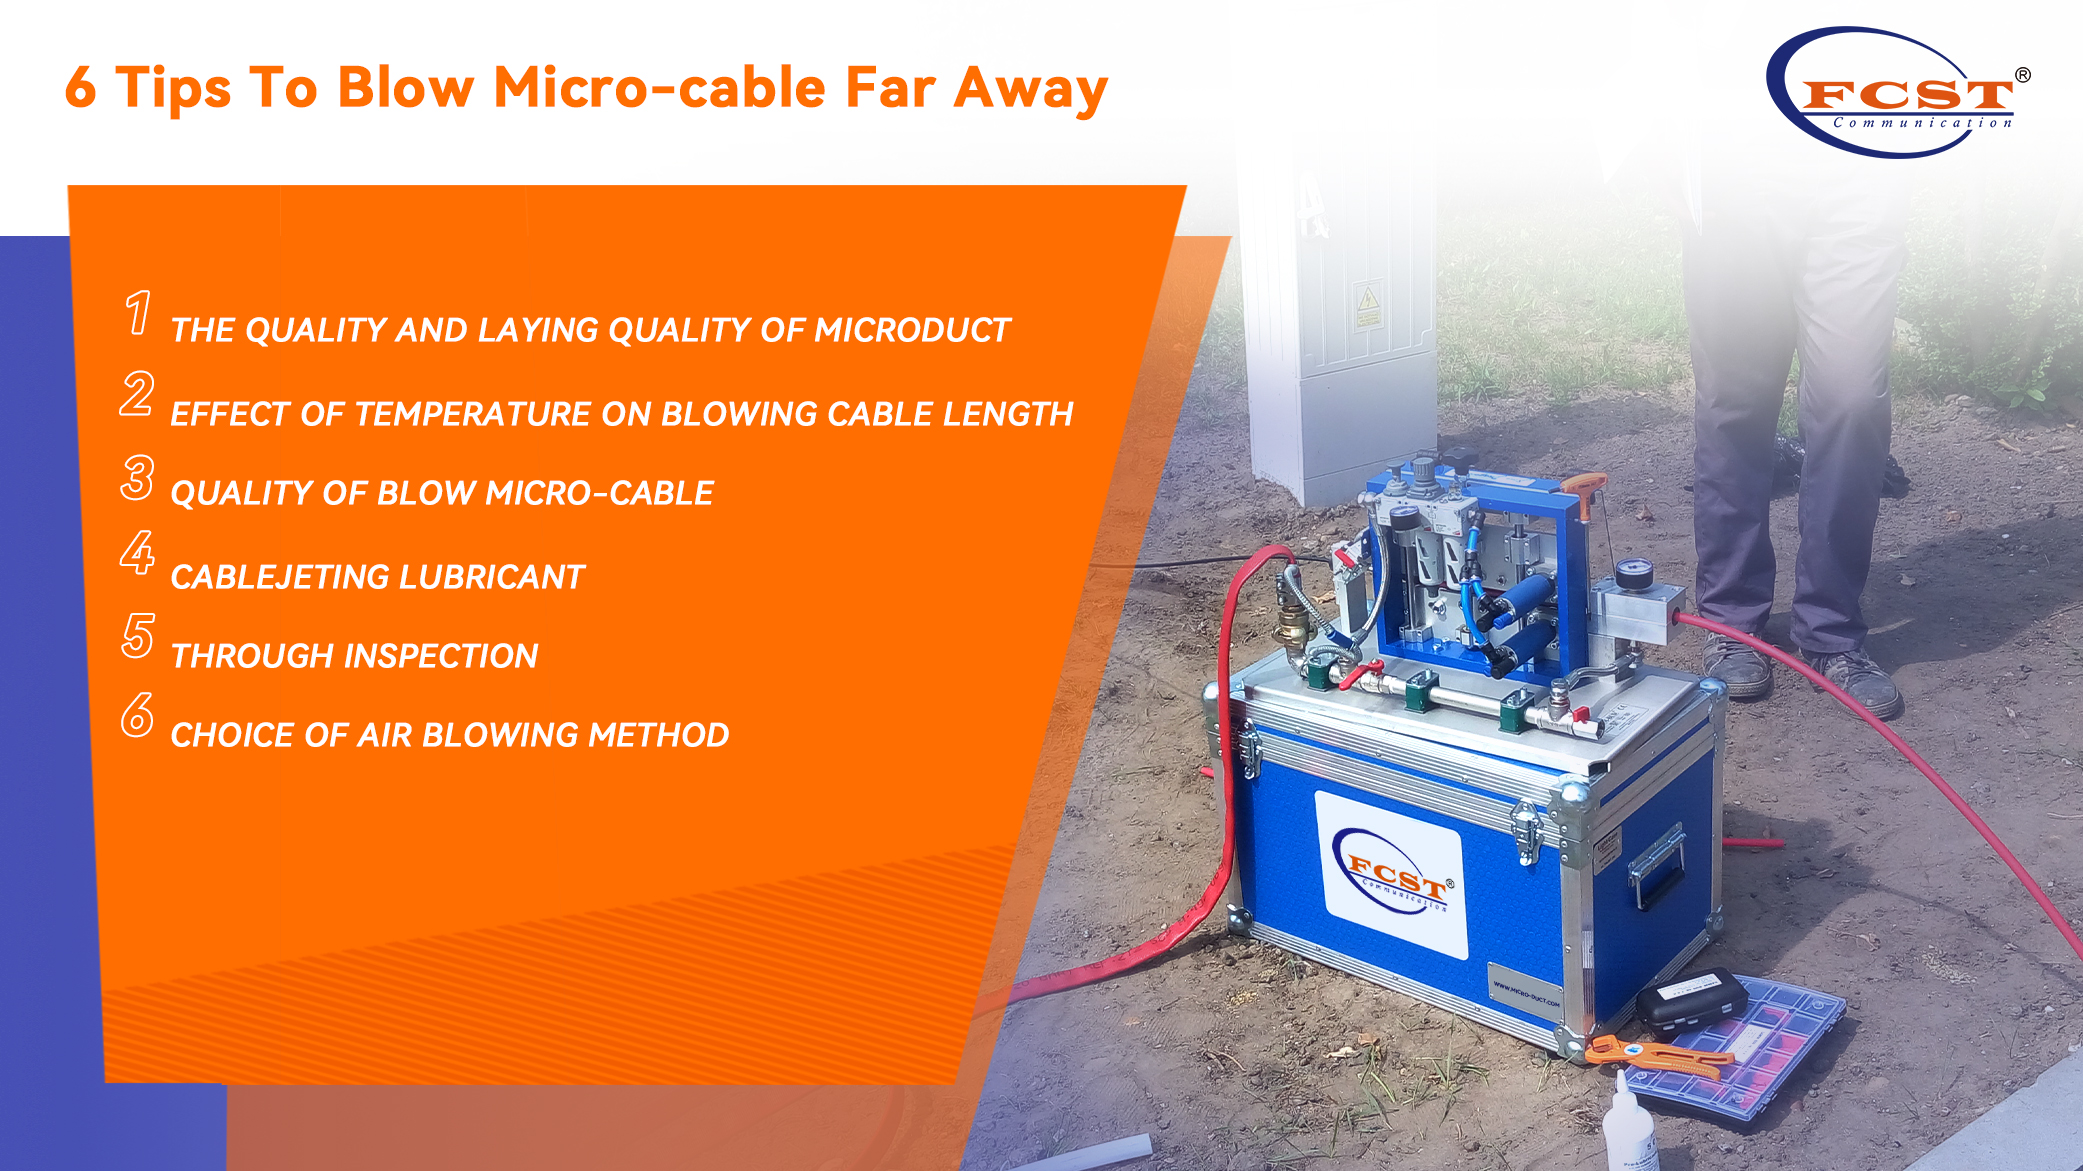 6 Tips To Blow Micro-cable Far Away